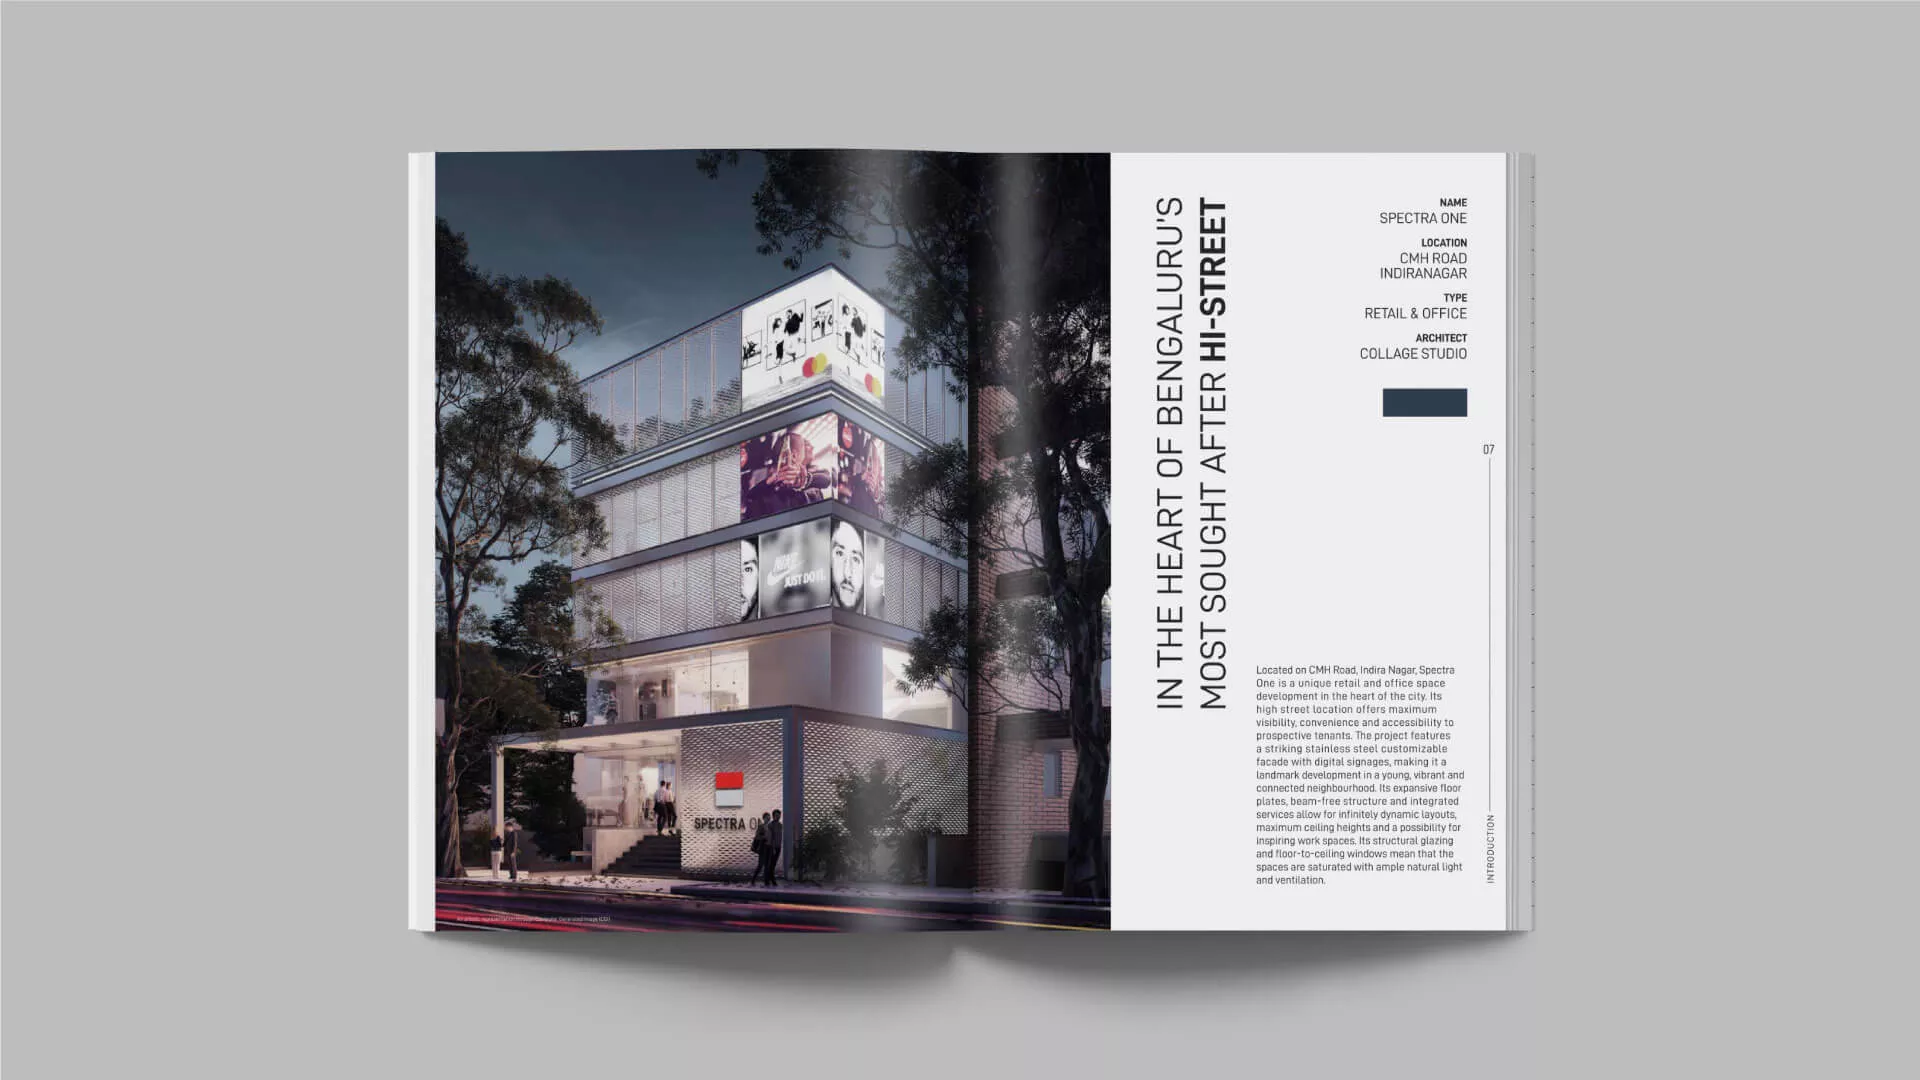 Spectra One Brochure Design Inside Page Layout